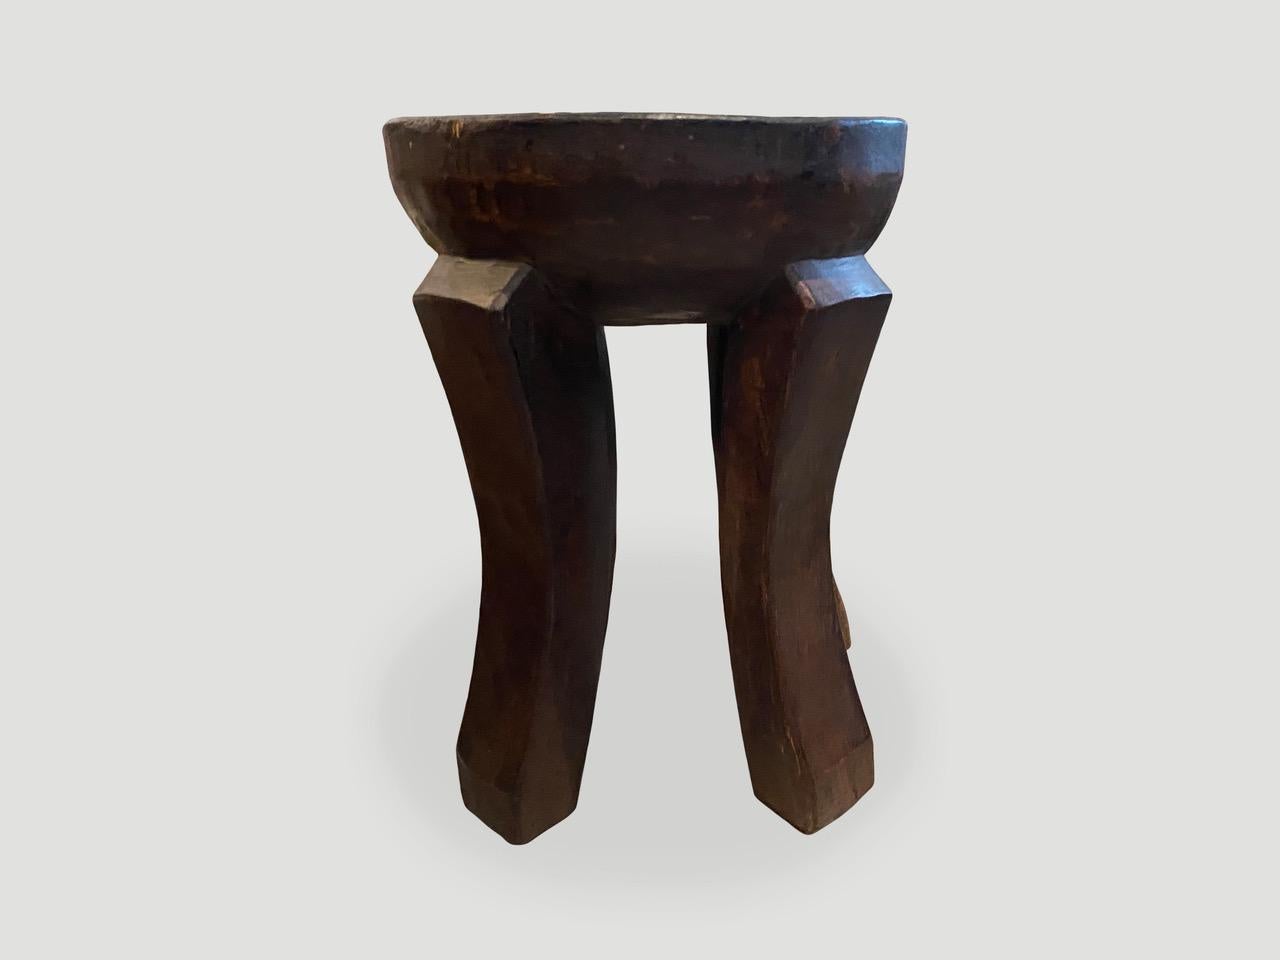 Antique African side table or stool hand carved from a single block of mahogany wood. The top is a thick bevel with beautiful hand carved legs and lovely patina. These stools have become collectable in recent years. We only source the best. 

This